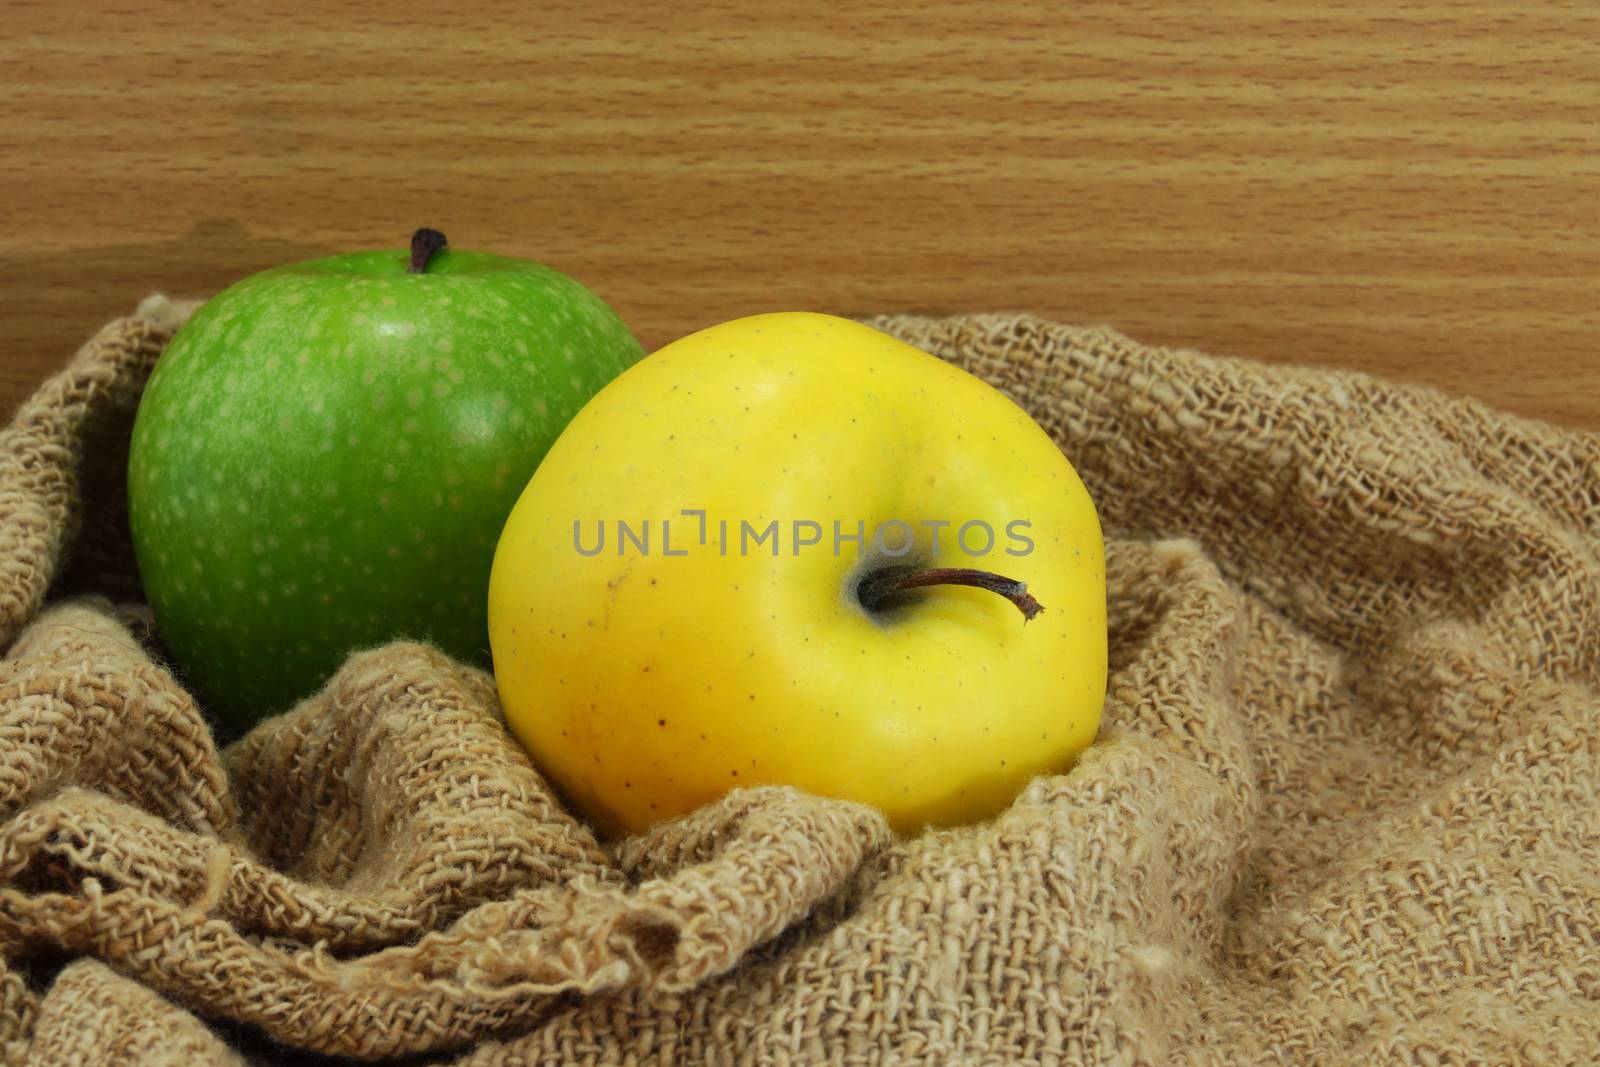 Yellow and green apple on fabric.